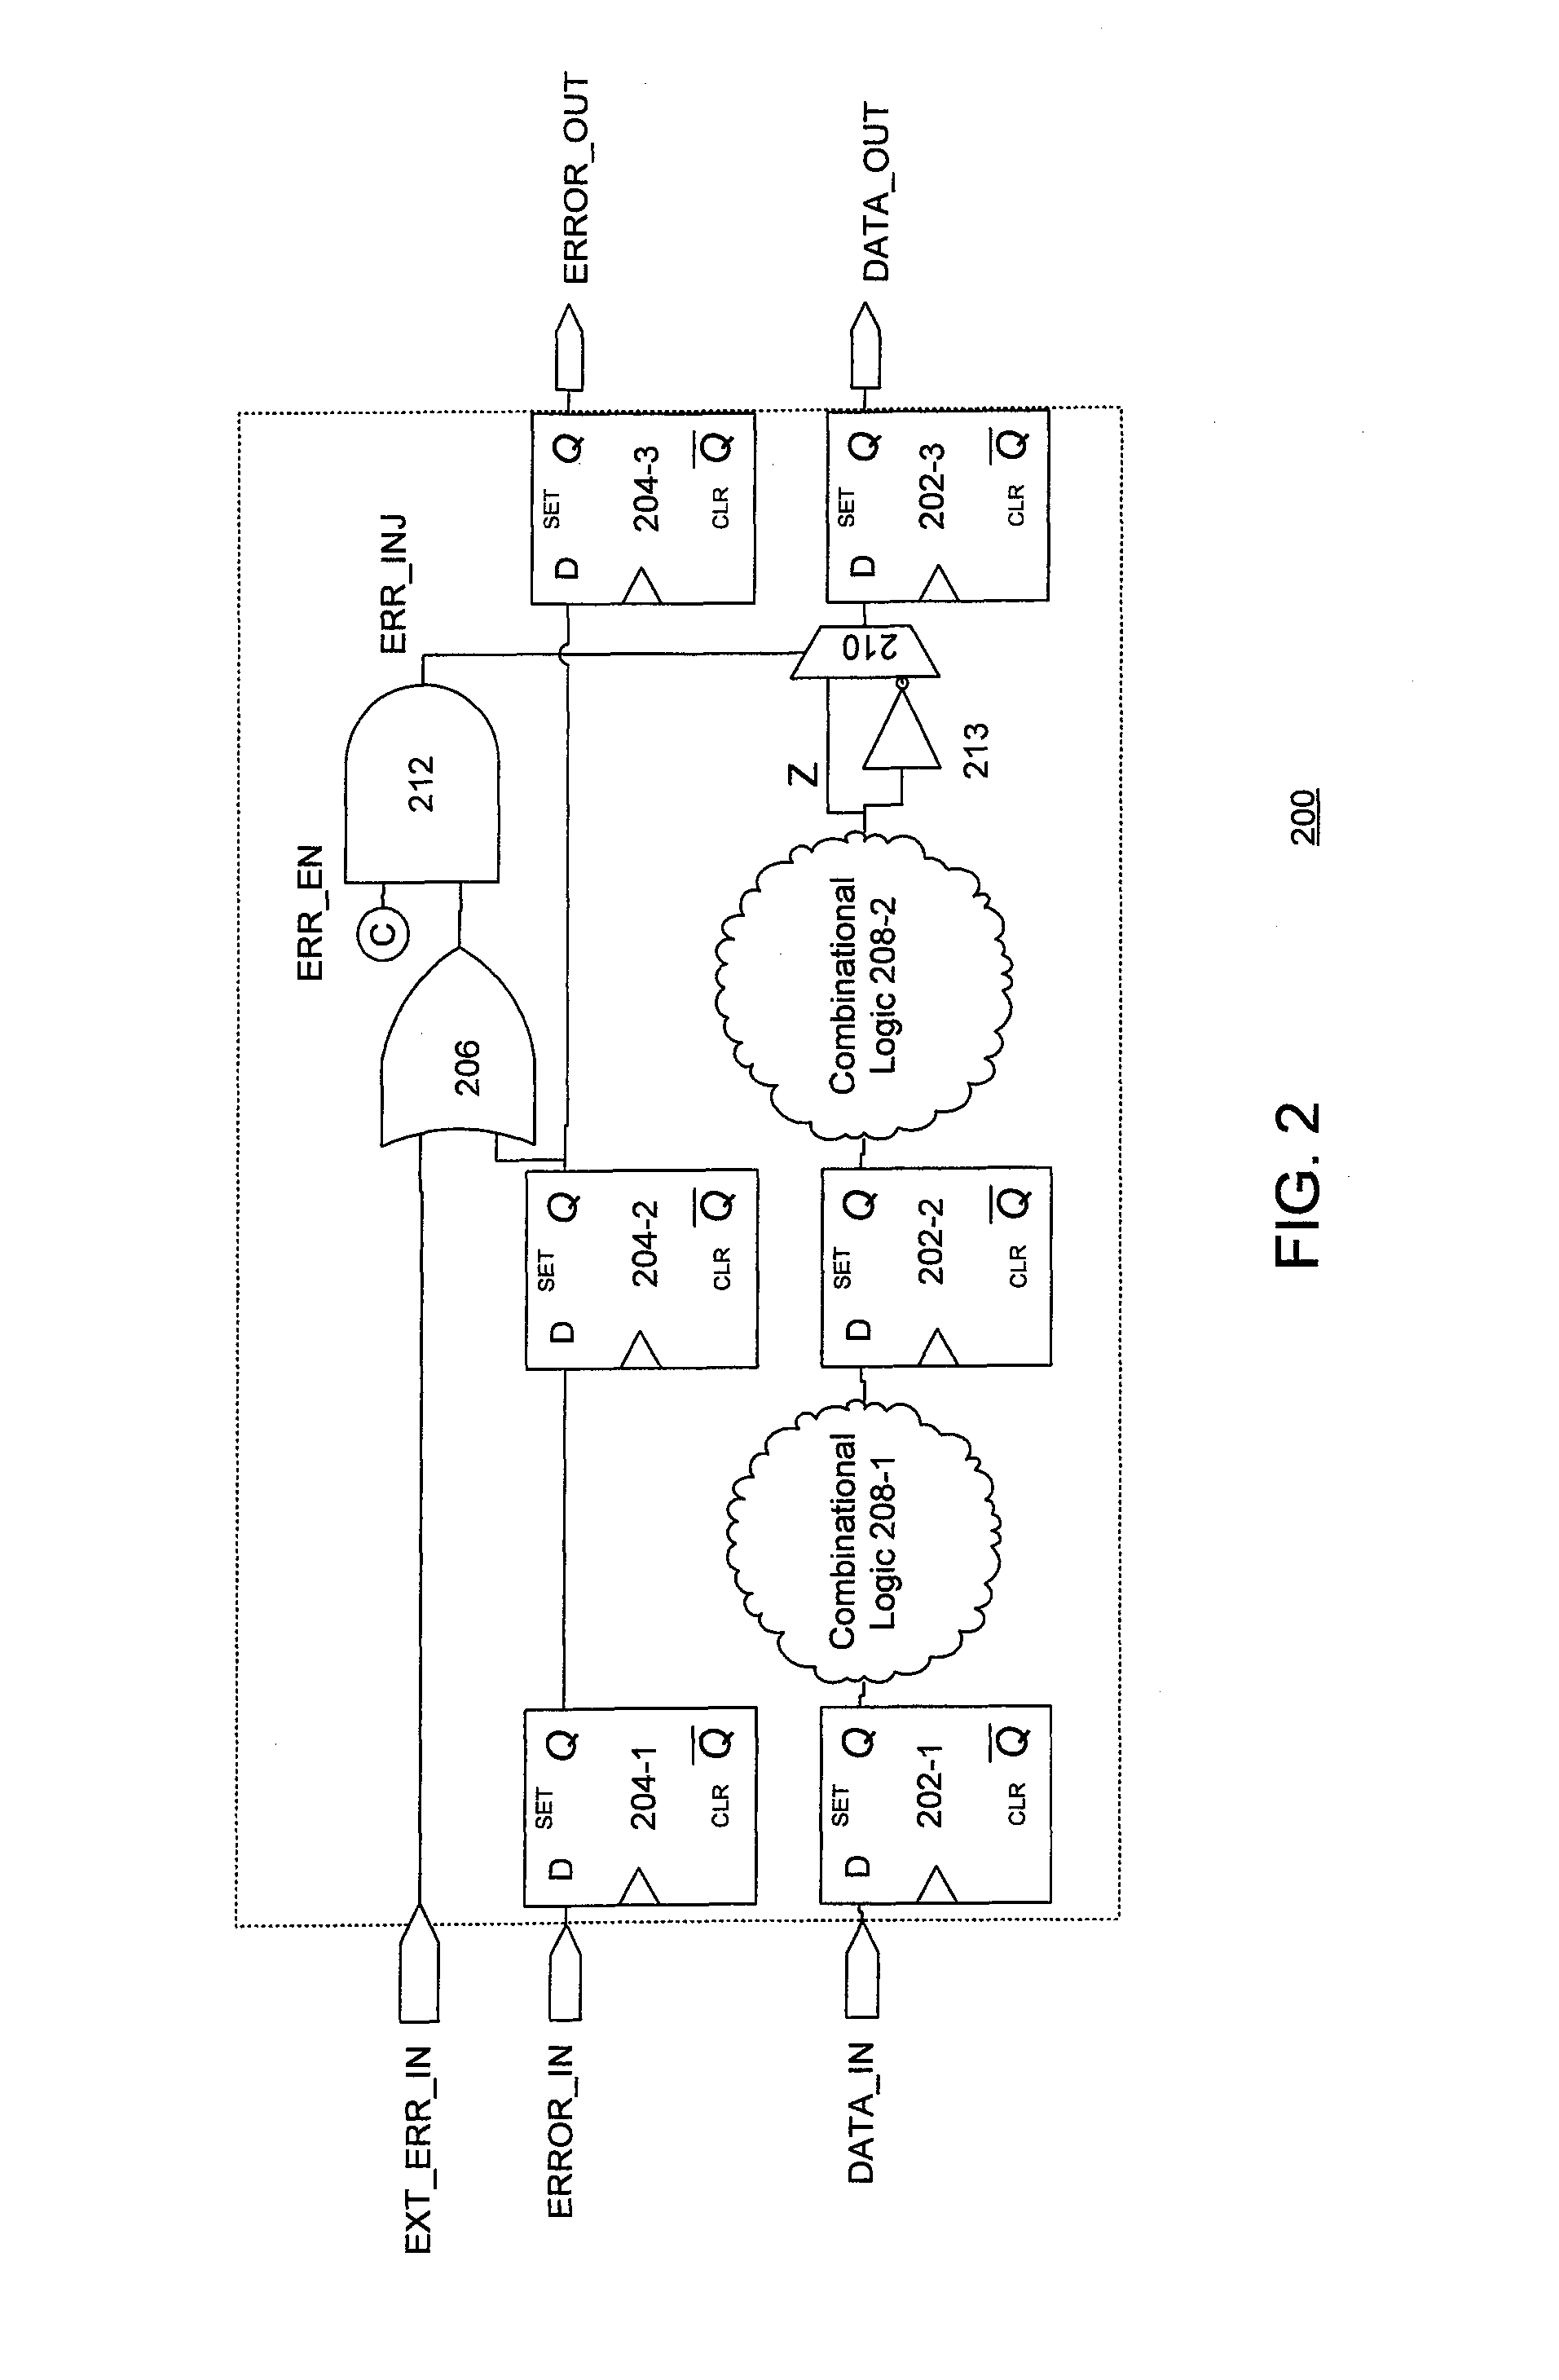 Apparatus and methods for controlled error injection